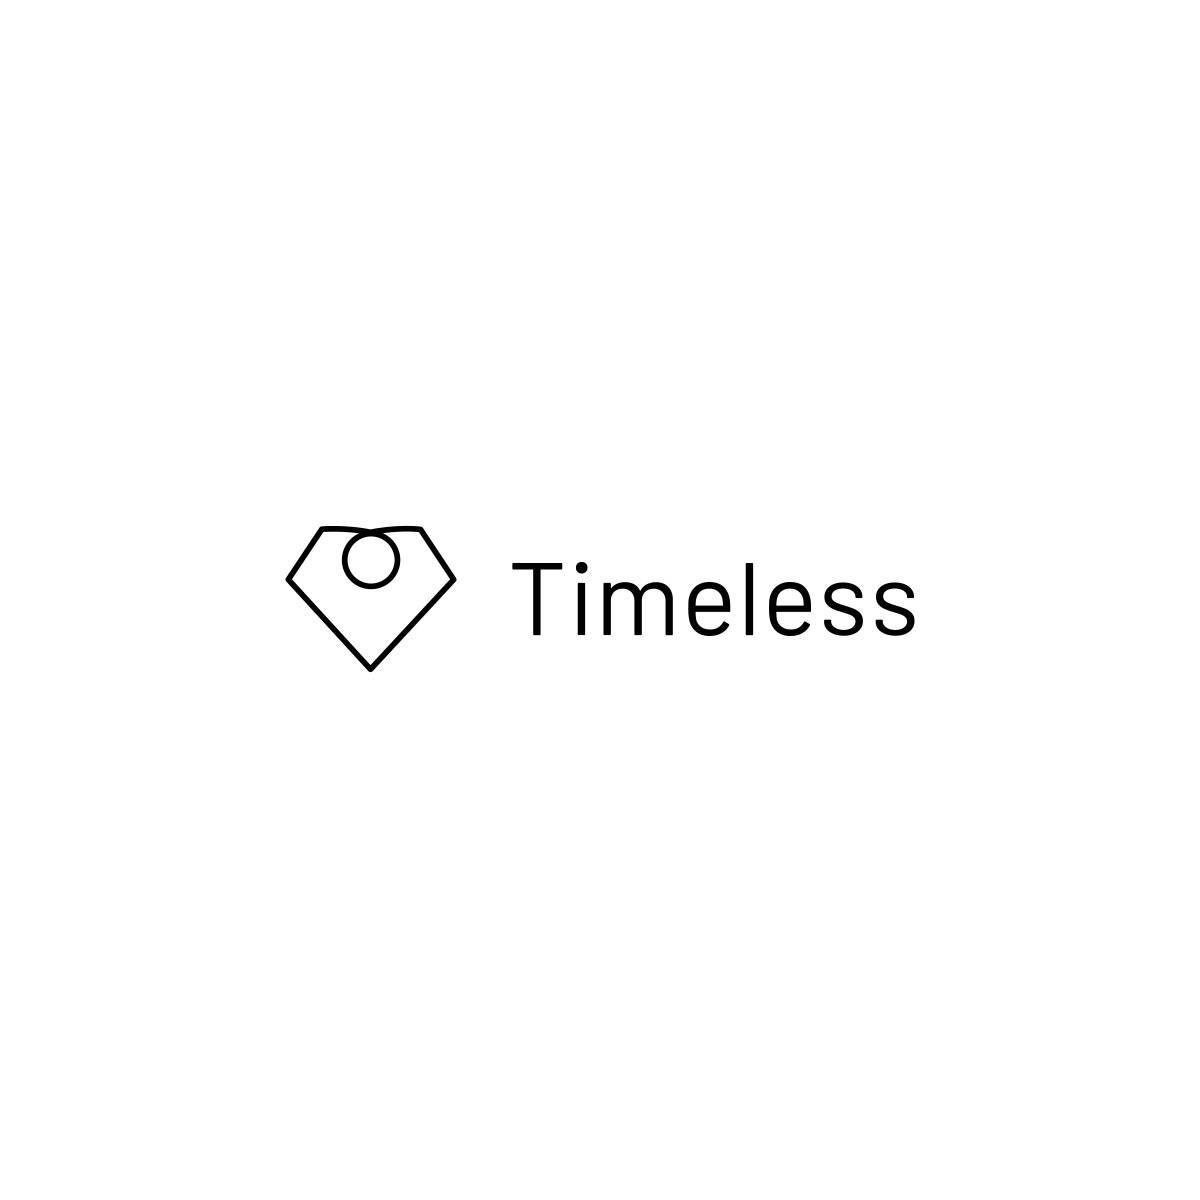 timeless - Invest in things you love